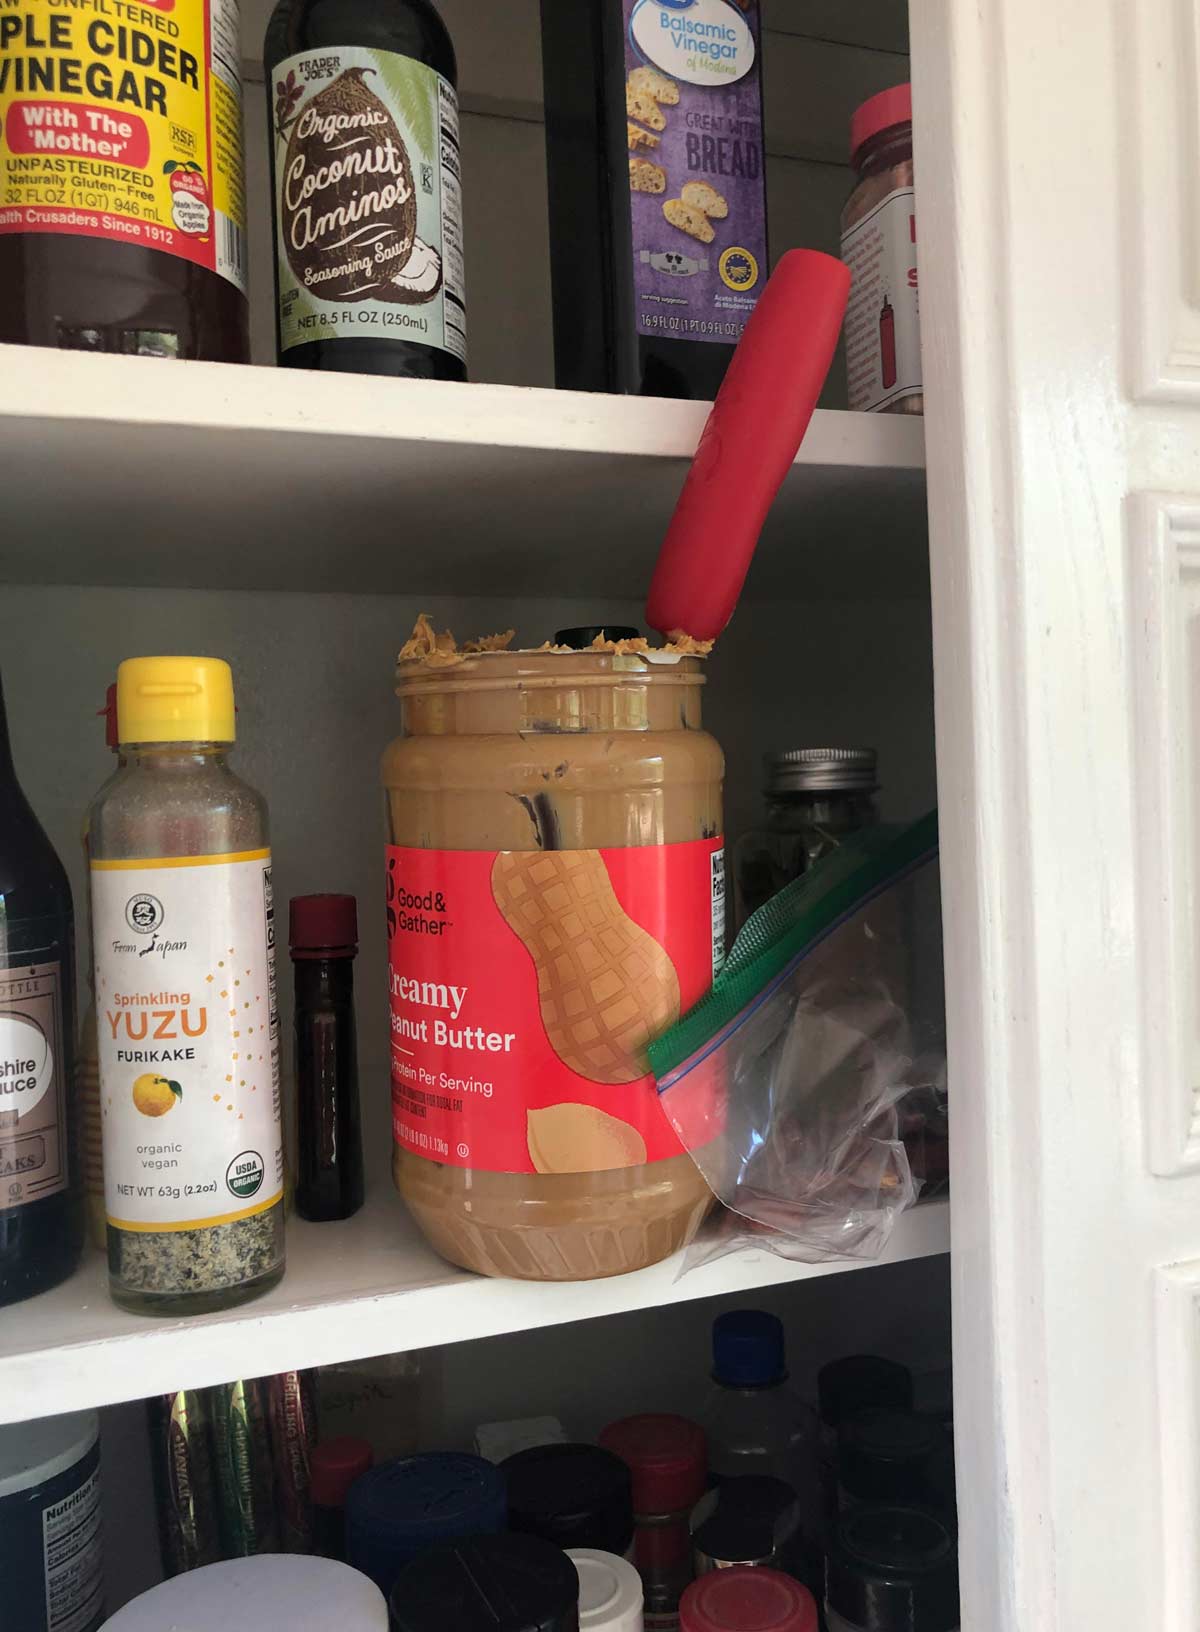 The way my fiancé leaves the peanut butter has me rethinking my choices